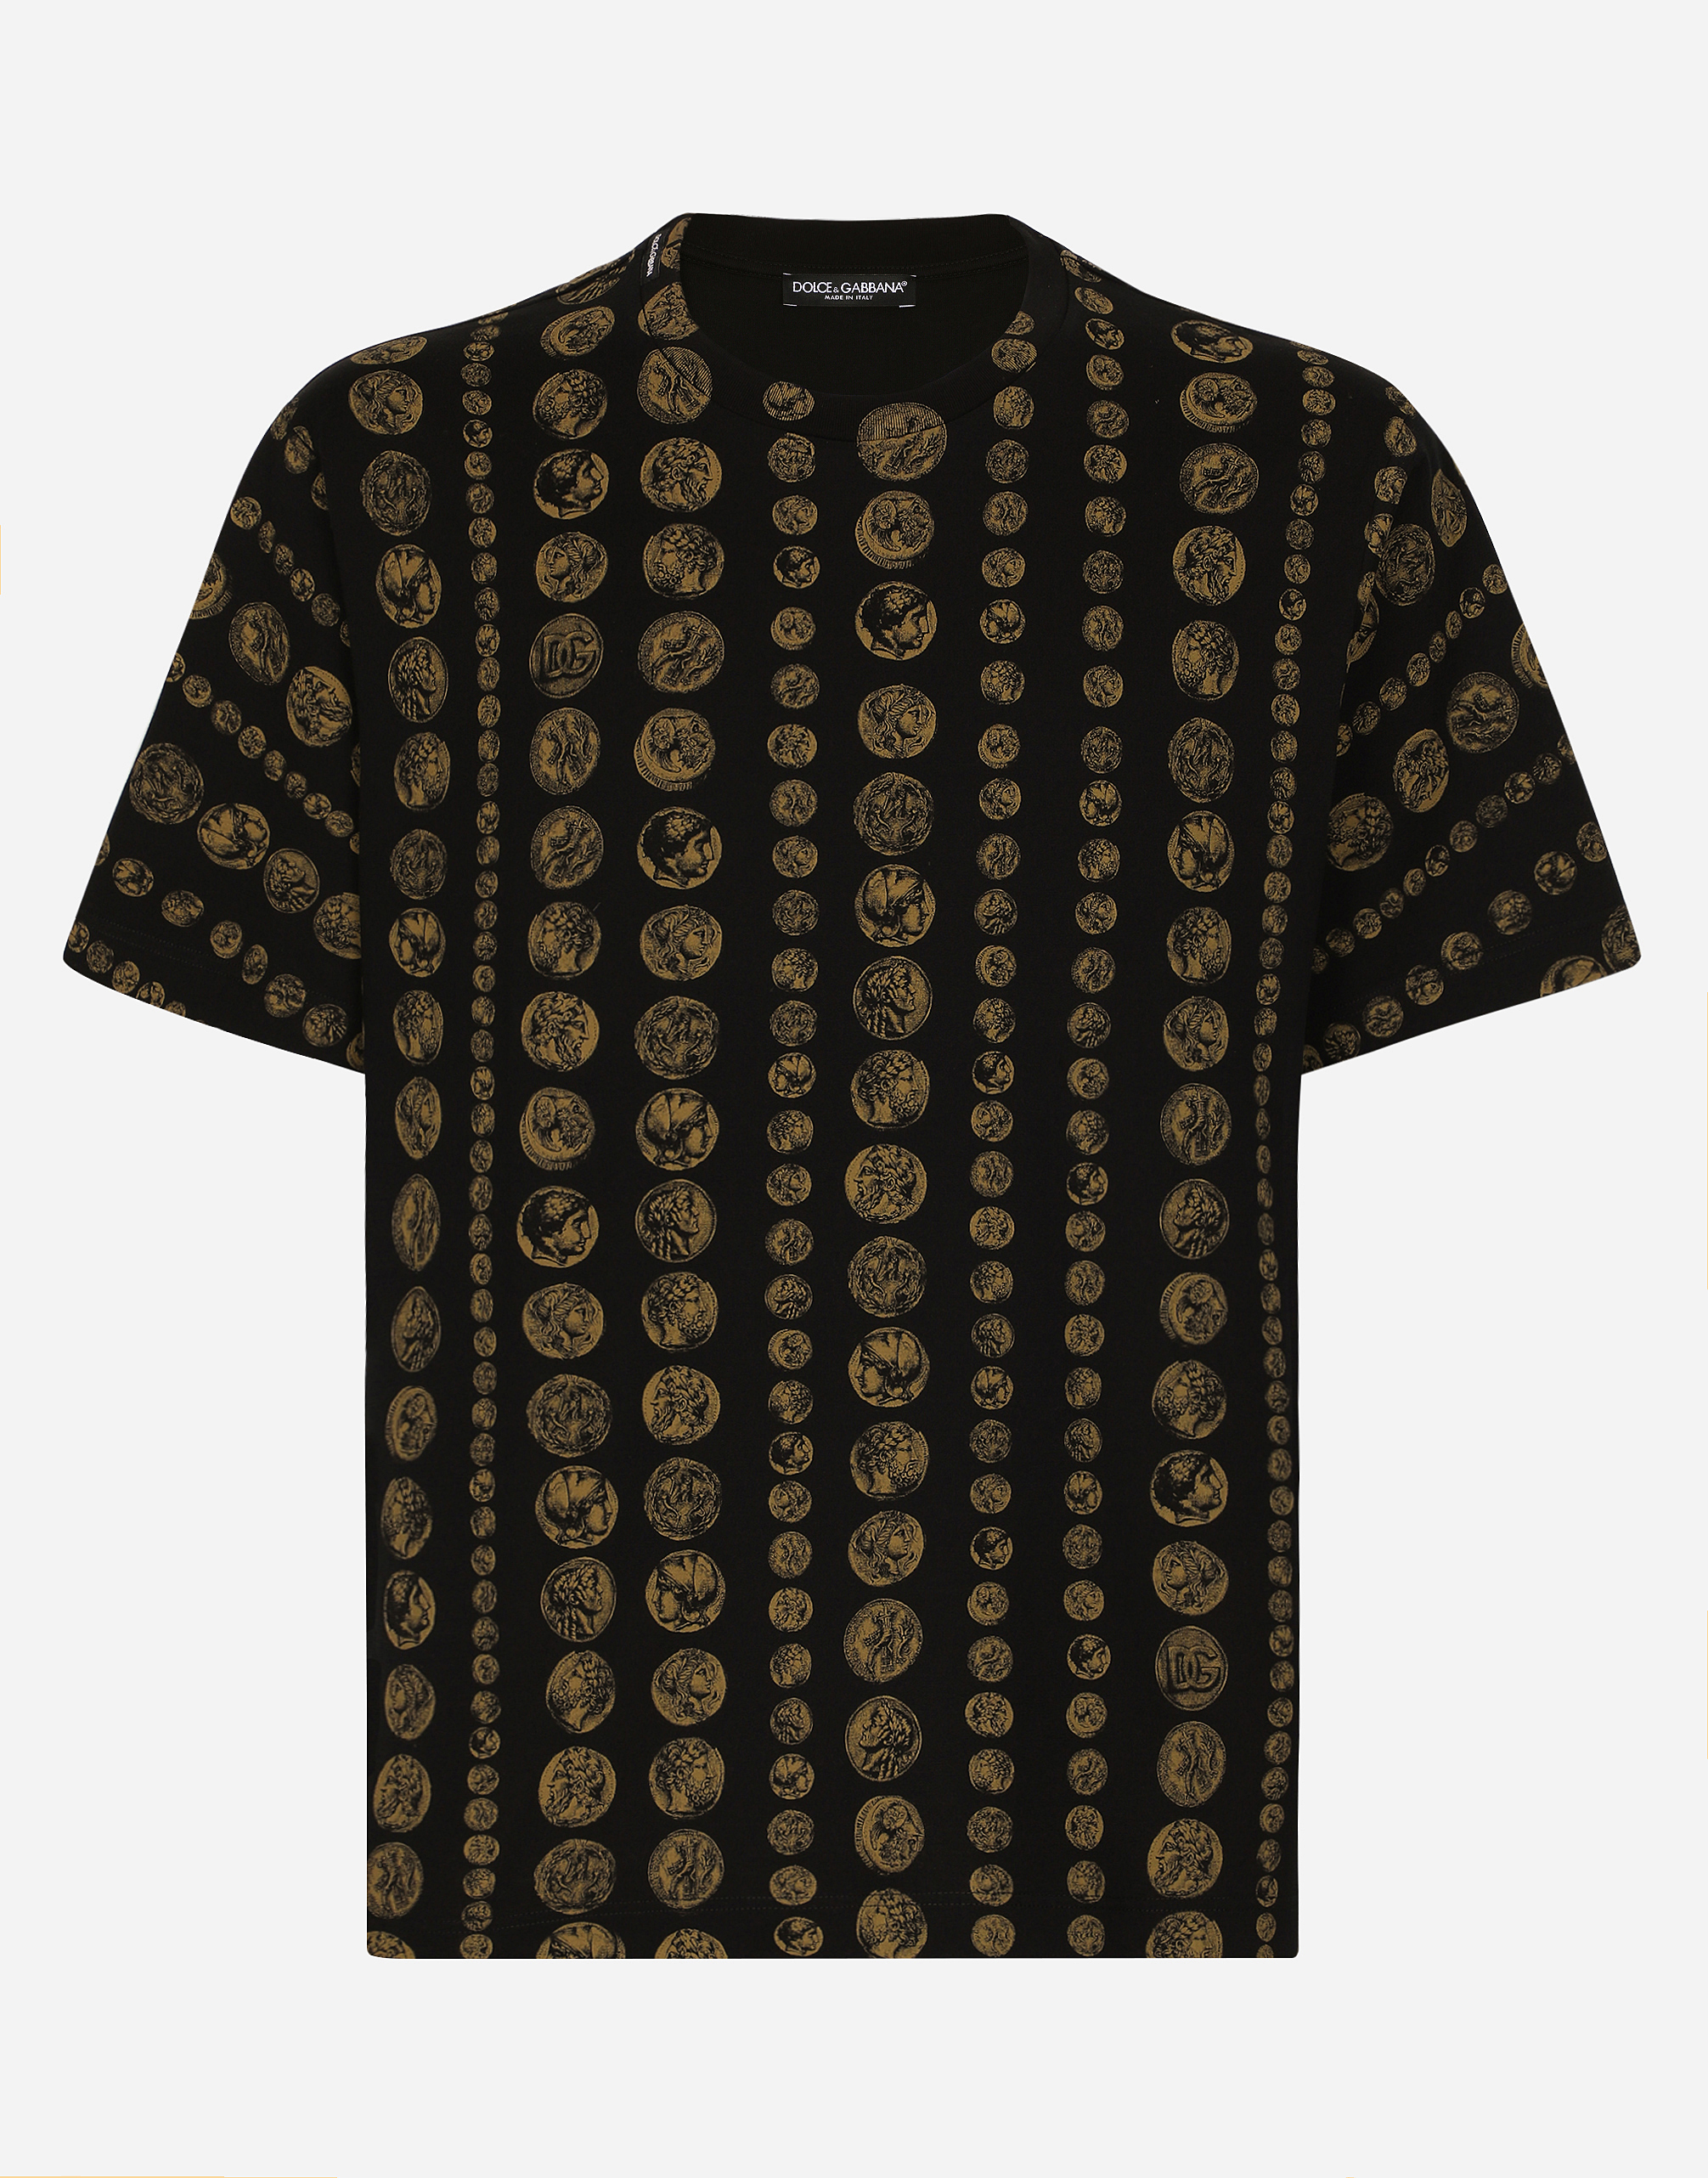 All-over coin print cotton T-shirt in Black